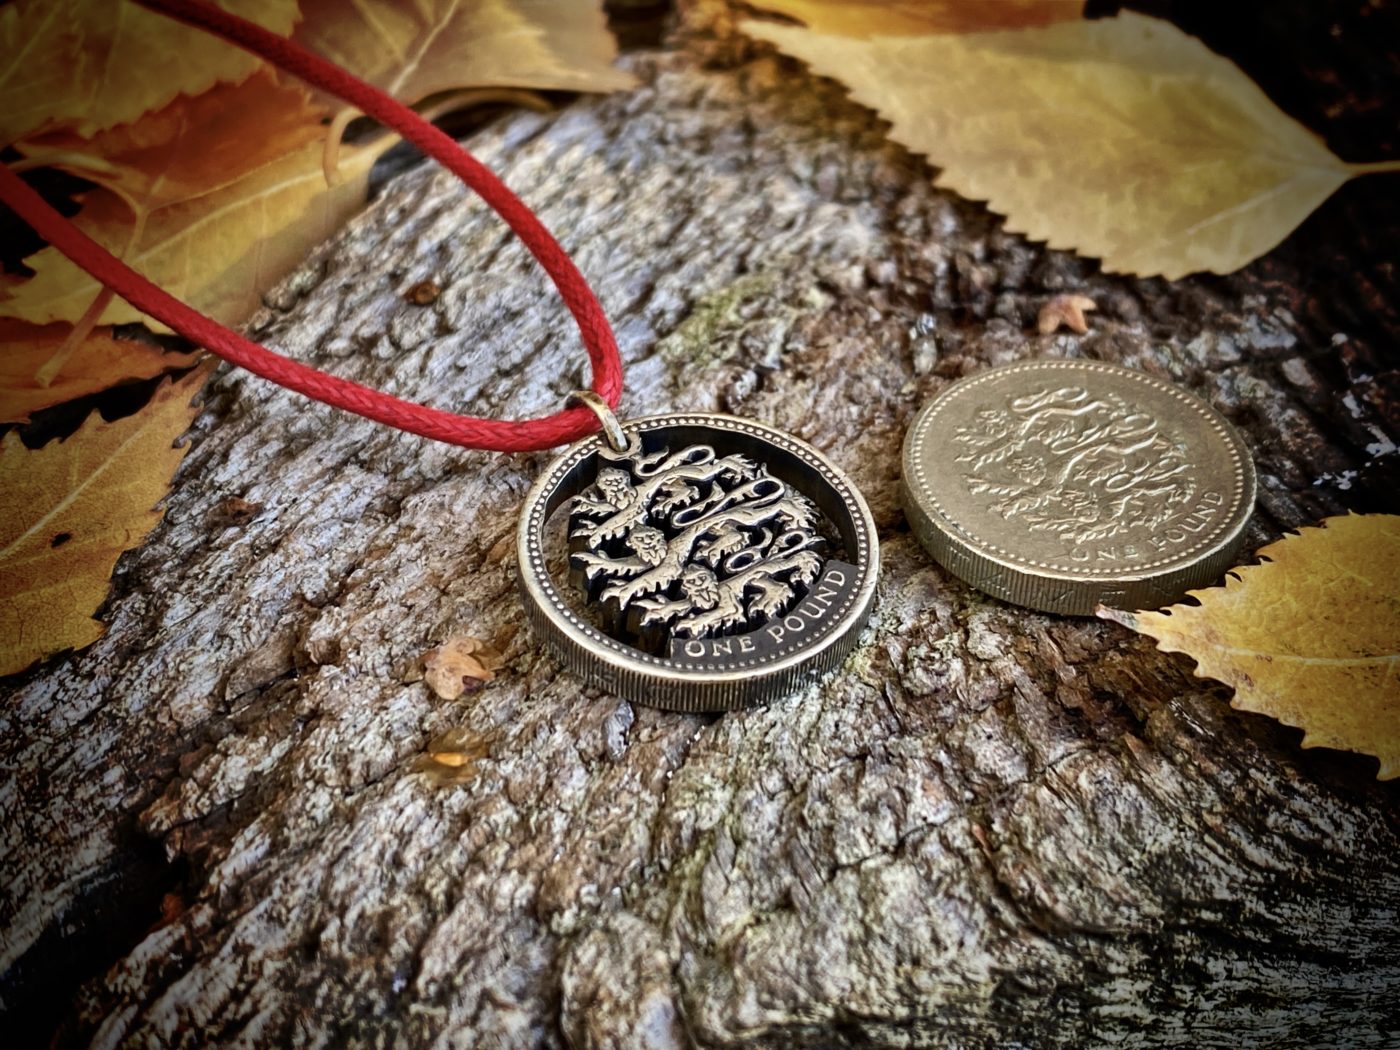 Hand Crafted and cut one pound coin pendants created from old, out of circulation pound coins, totally original and unique